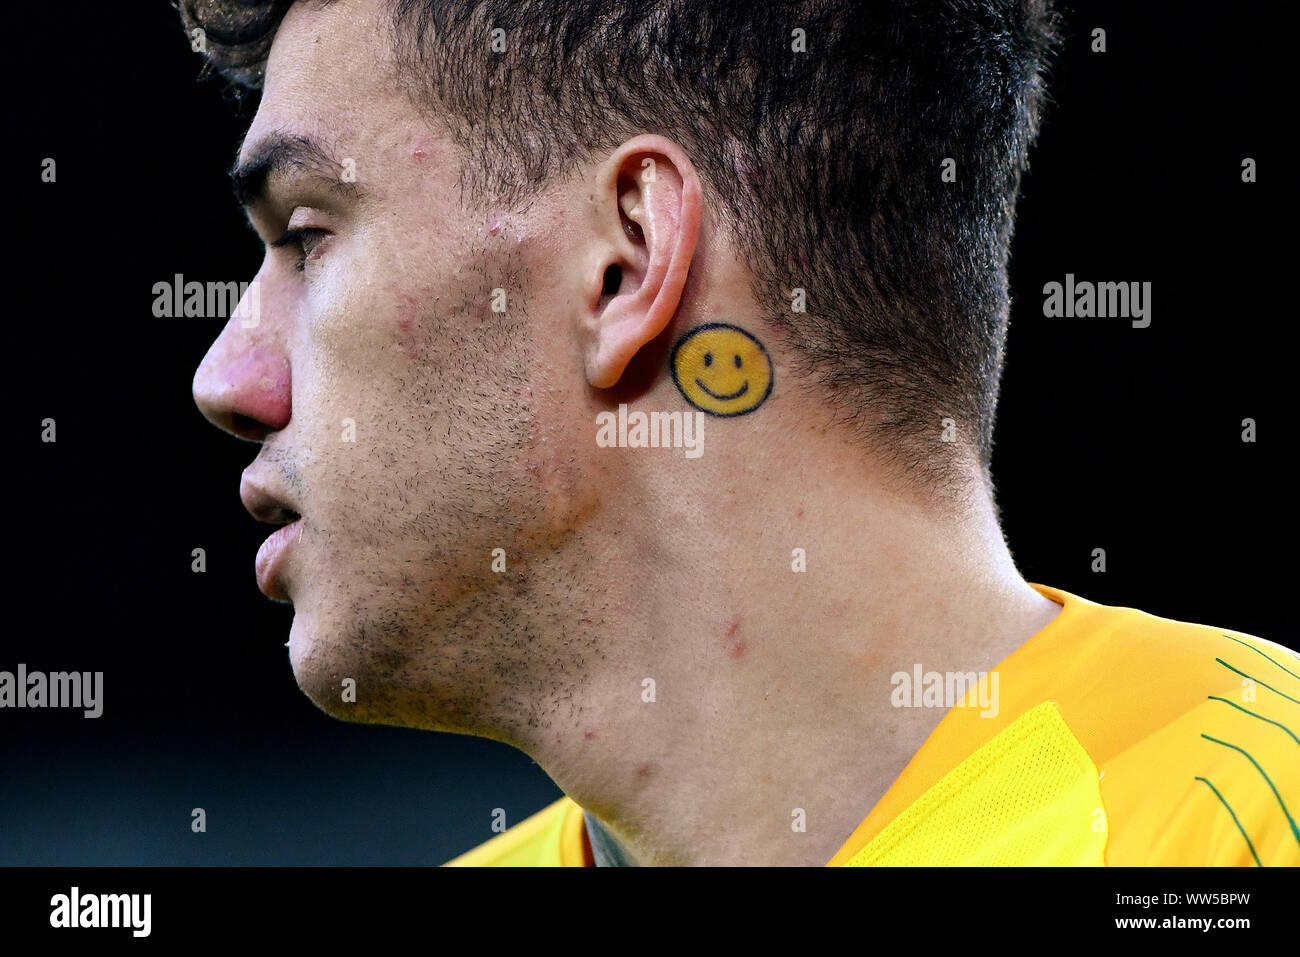 Manchester City goalkeeper Ederson has a smiley face emoji tattoo on his  neck during the Premier League match at St Marys Stadium Southampton  Stock Photo  Alamy